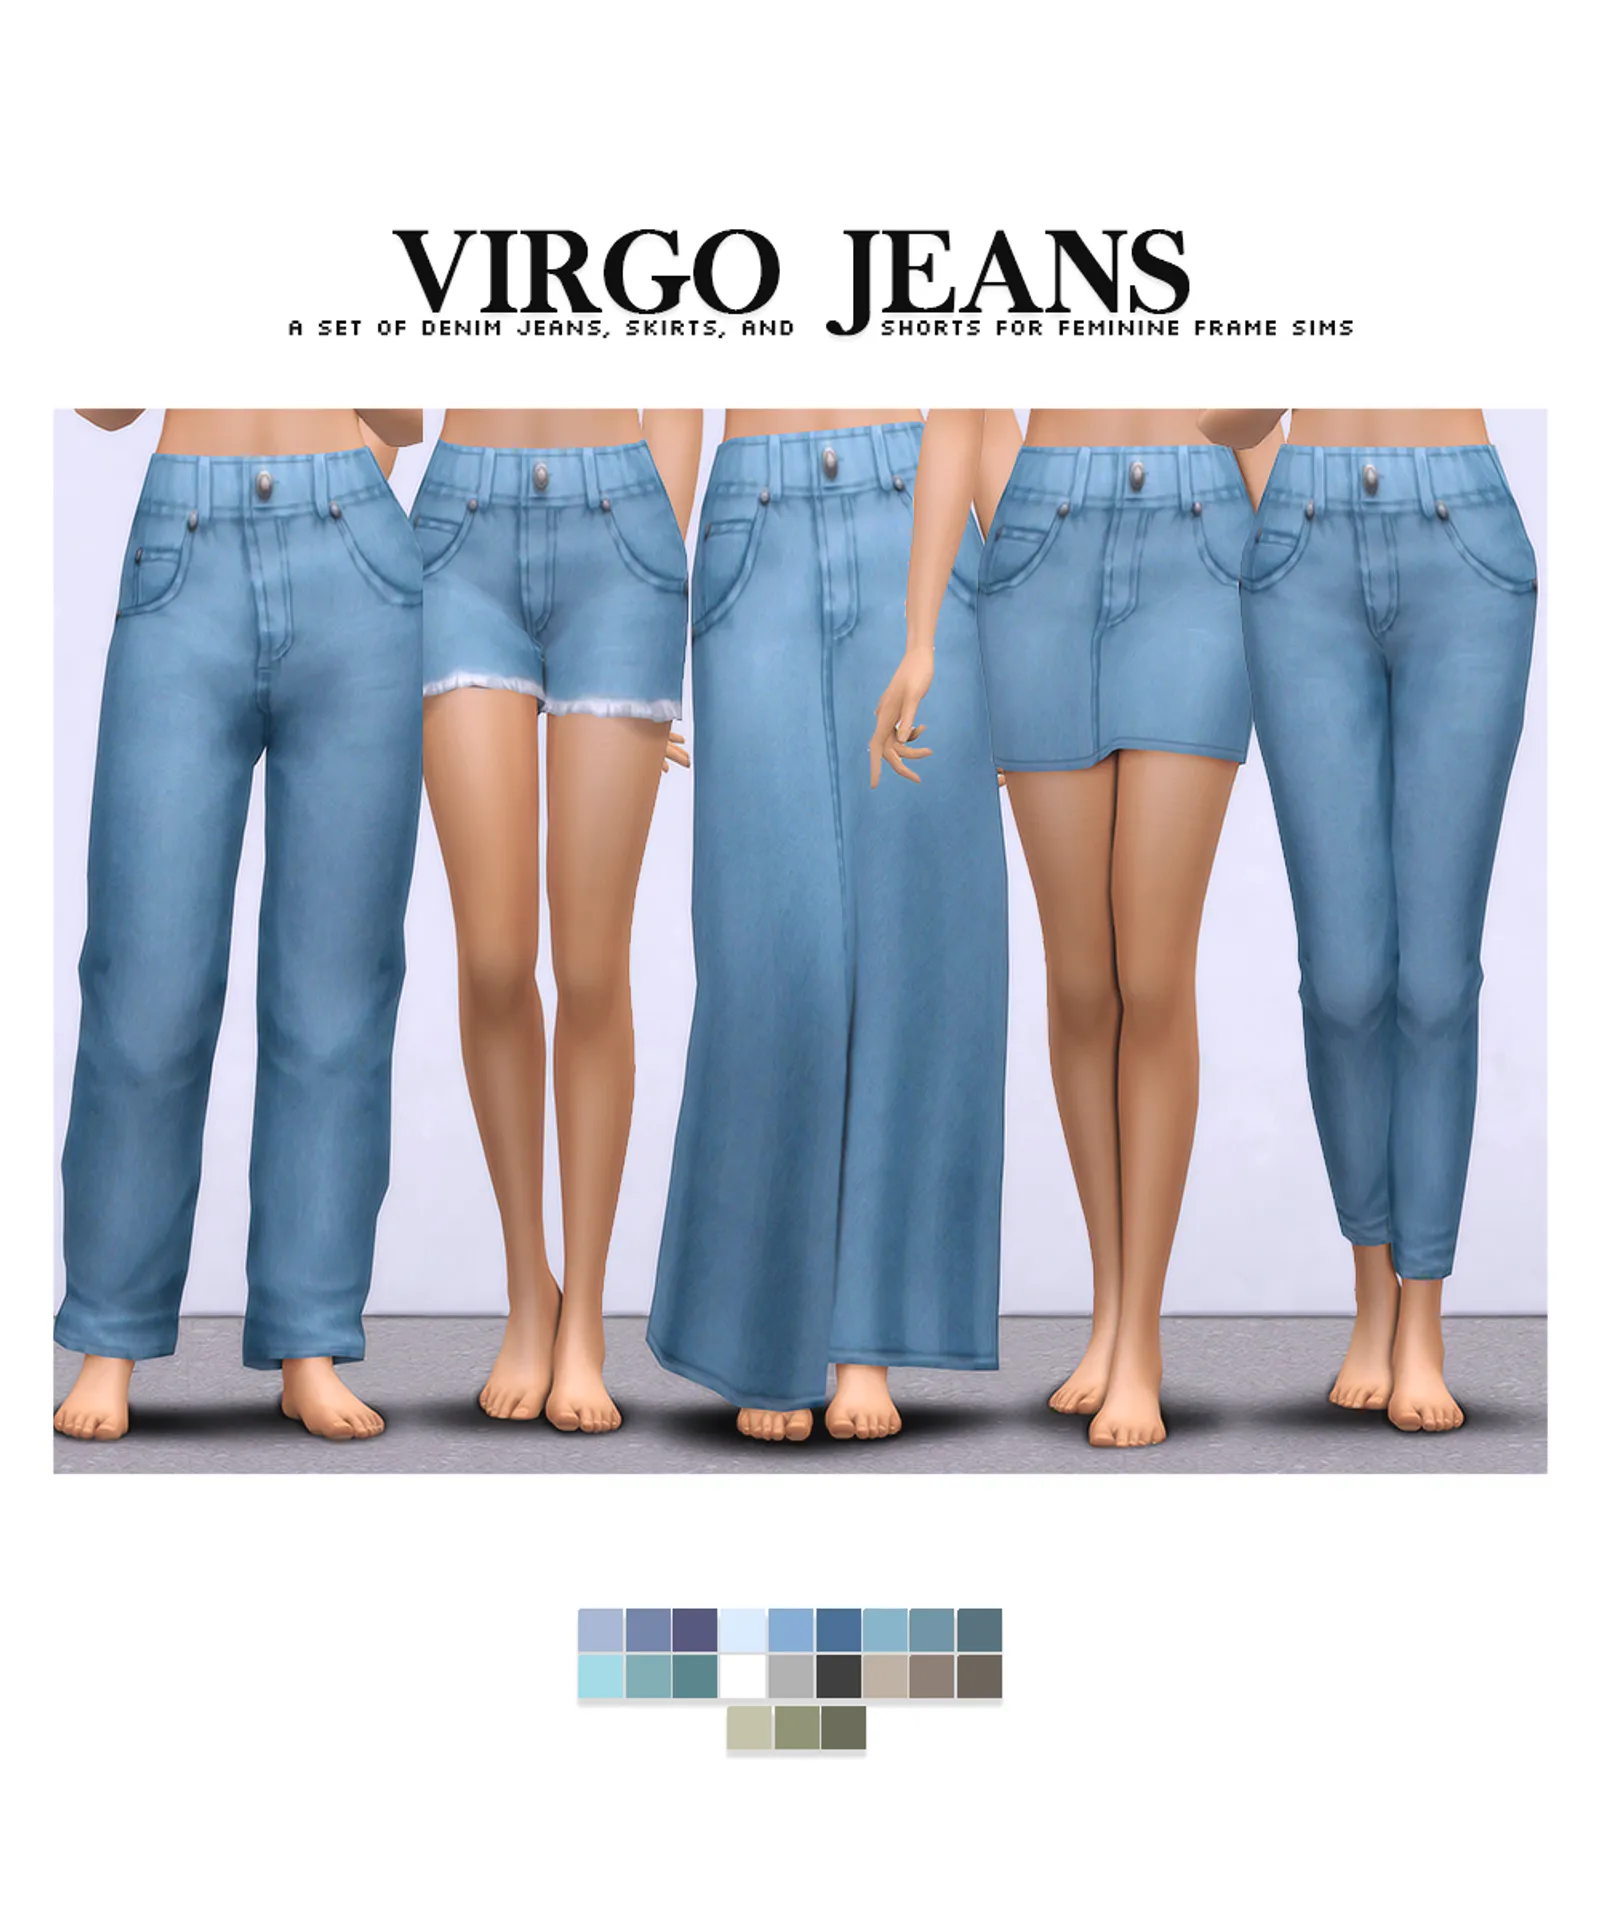 Virgo Jeans by @nucrests